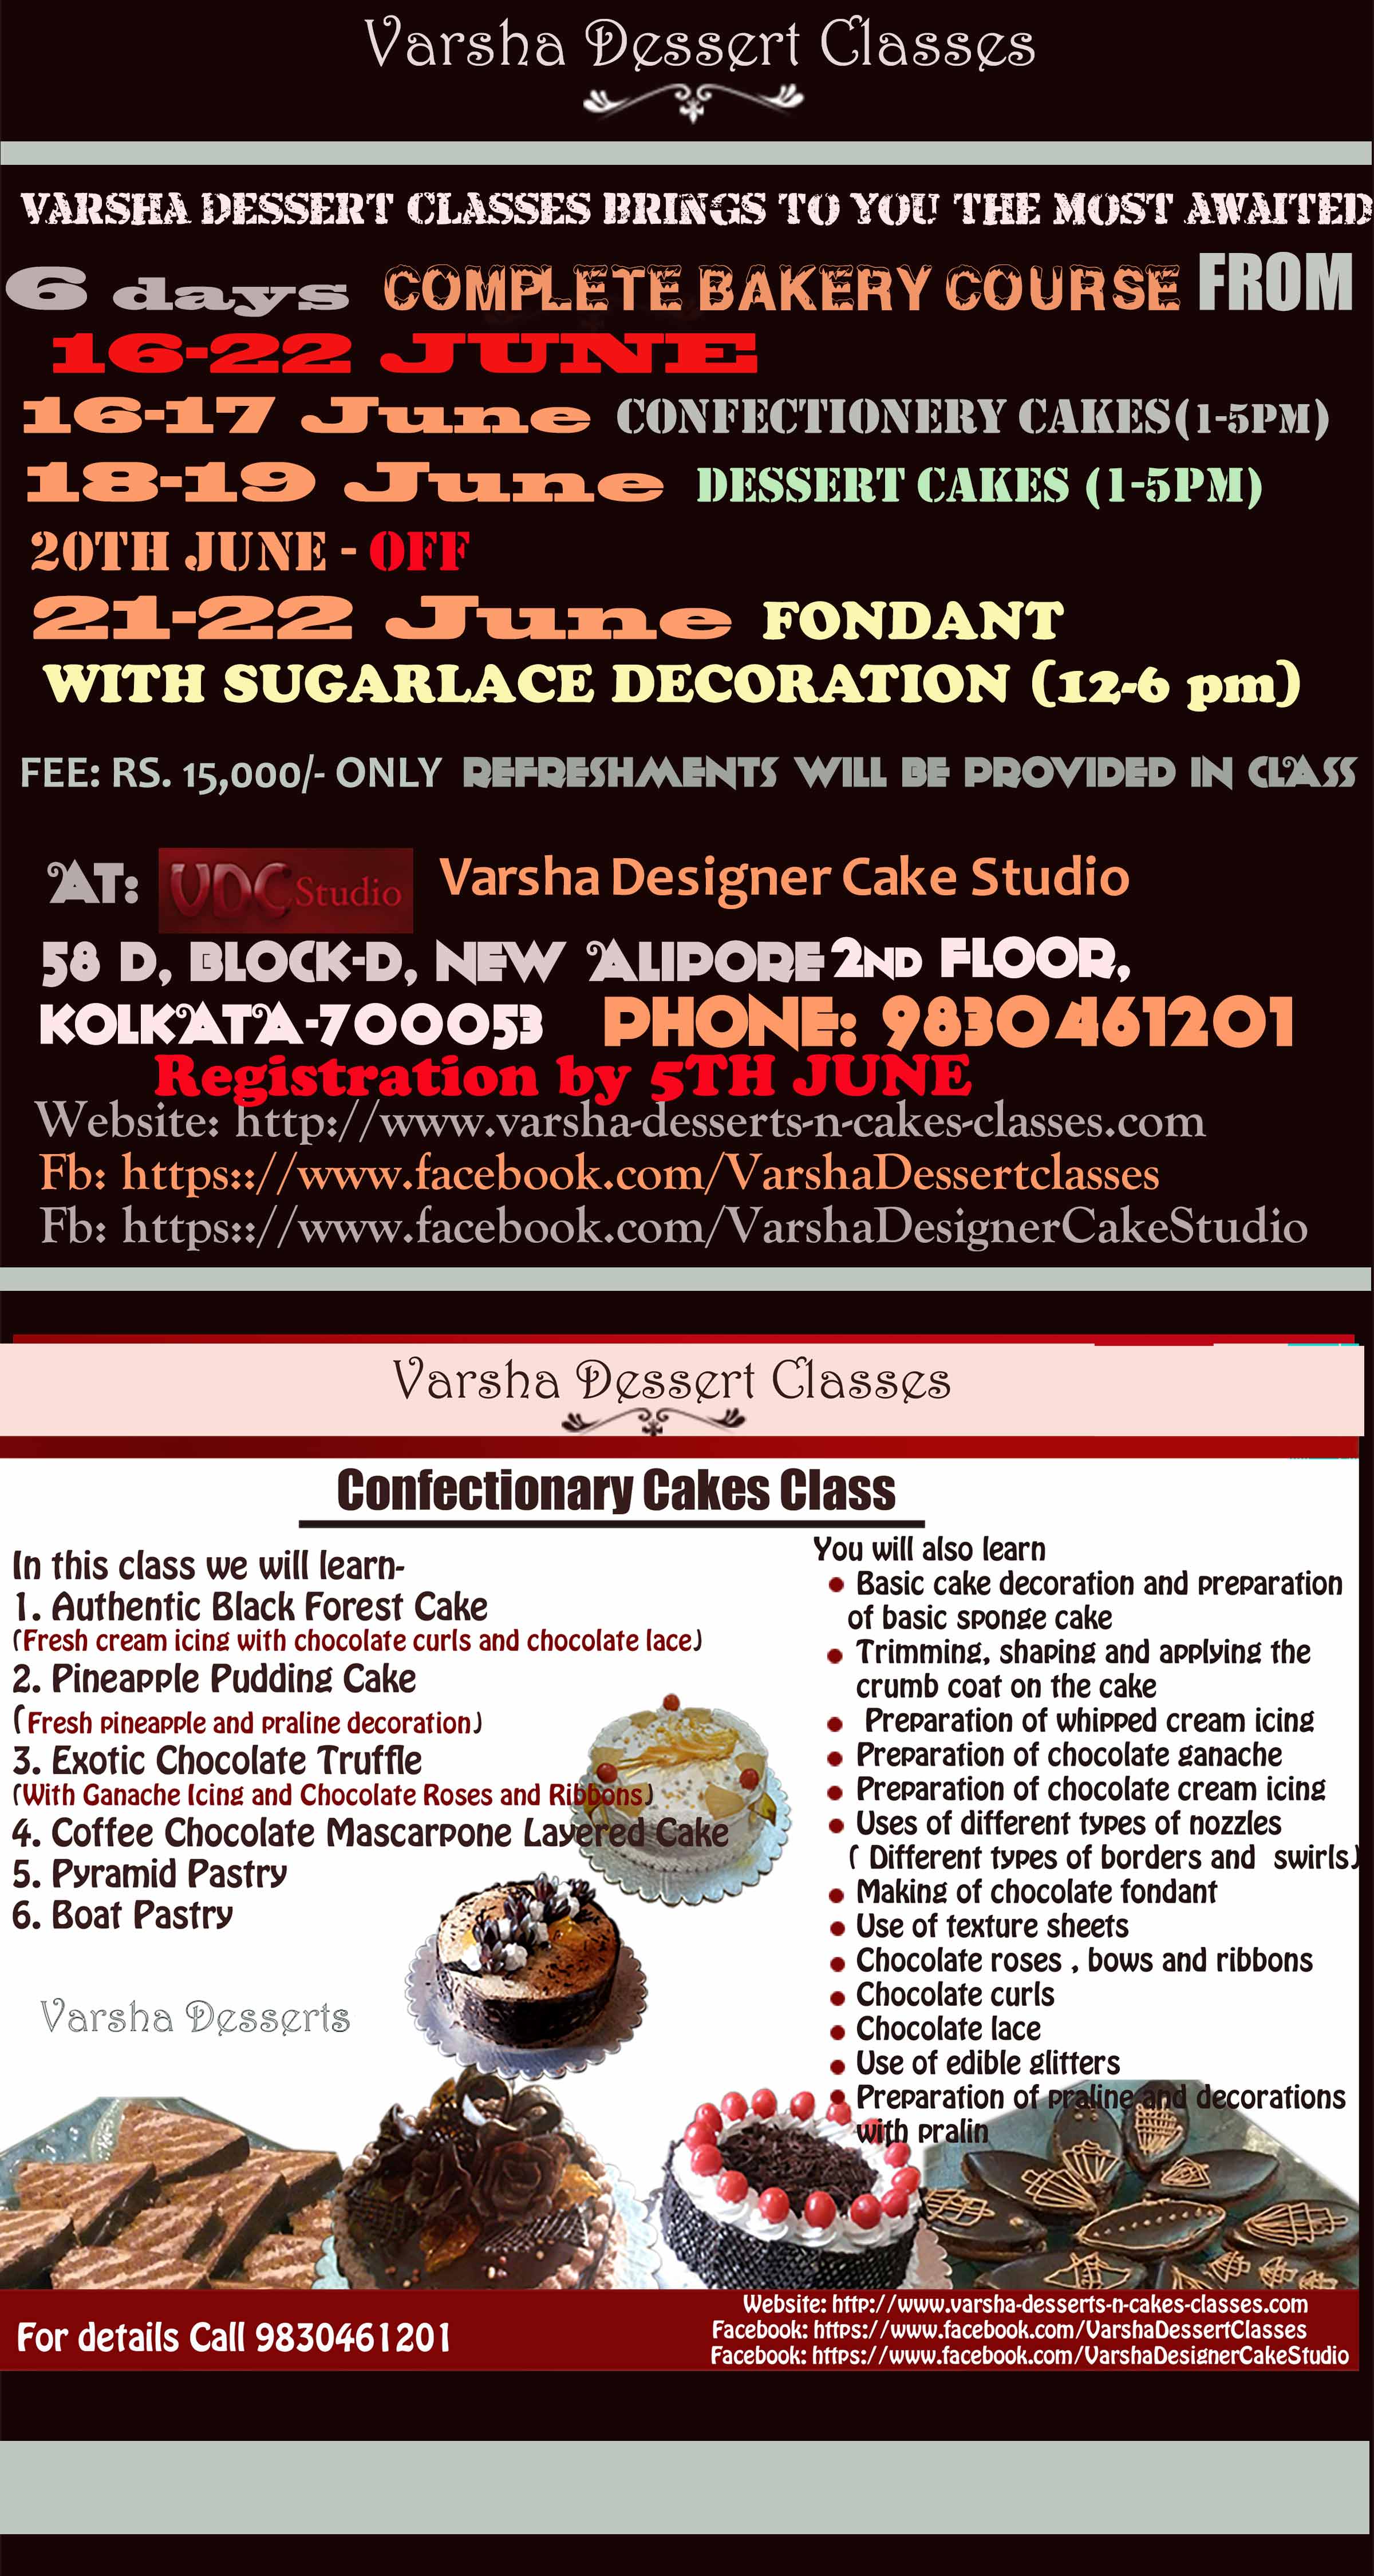 COMPLETE BAKING COURSE FROM 16TH TO 22ND JUNE